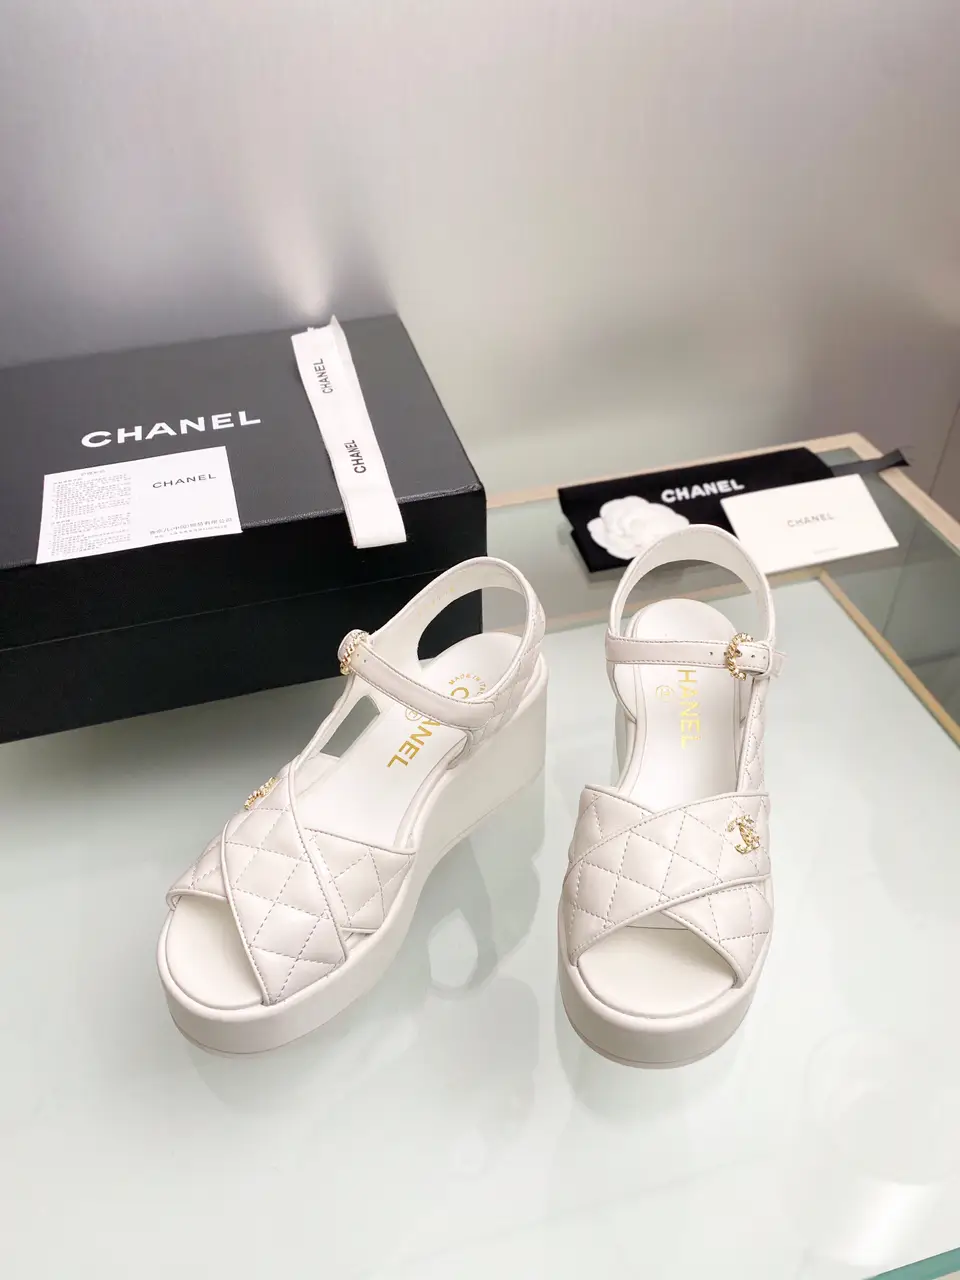 Chanel milk whirring white sandals🤩🤩🤩, Gallery posted by Lisa💖